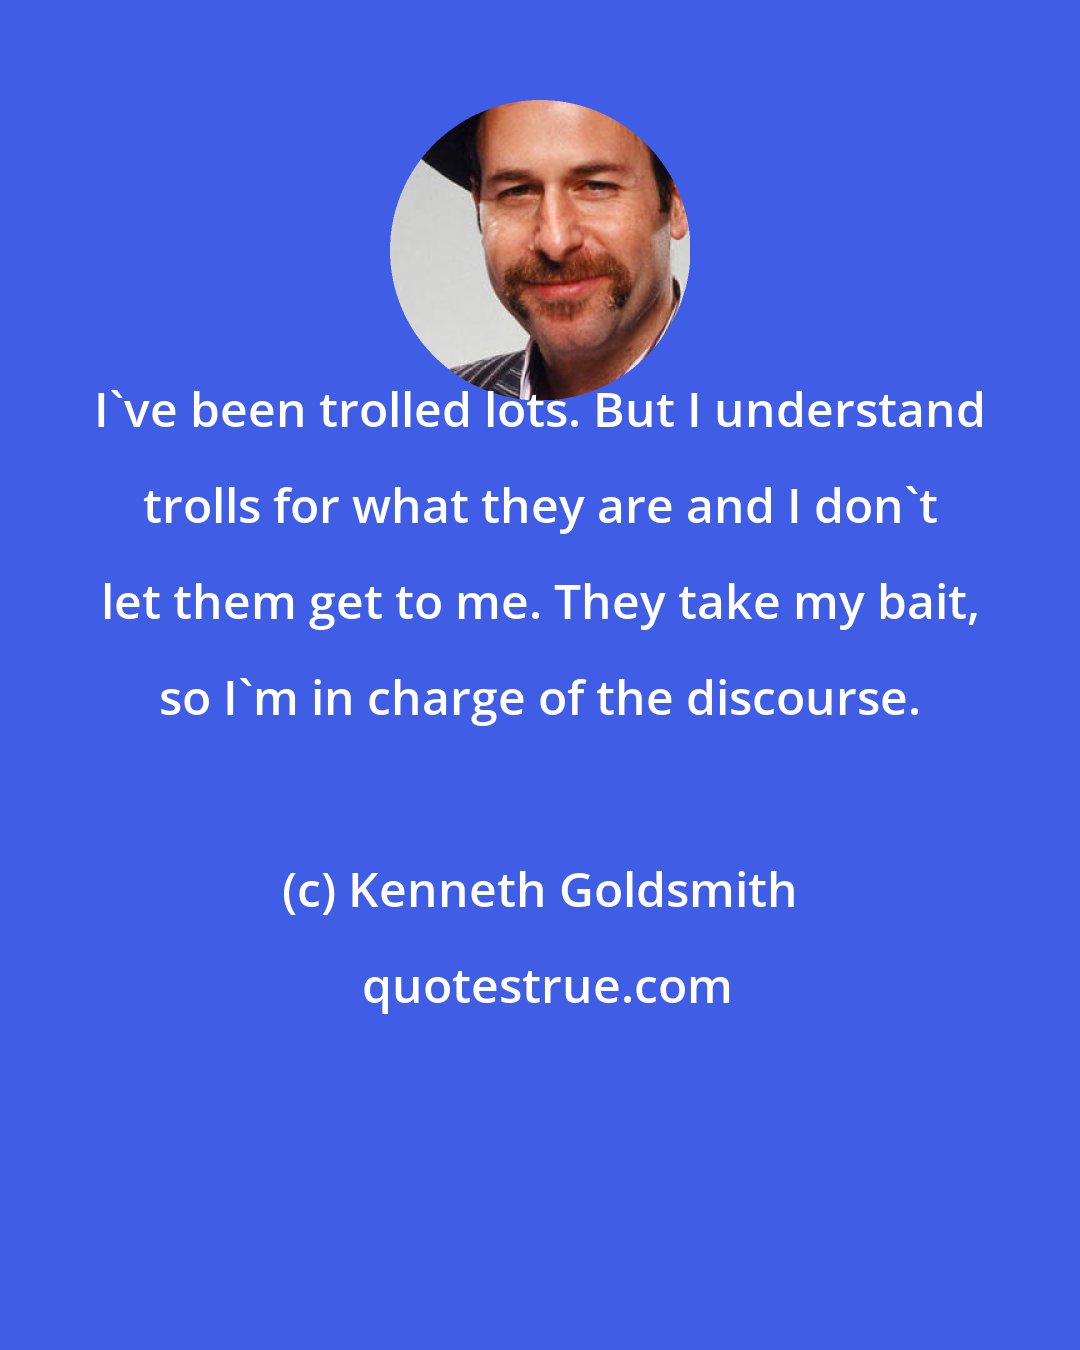 Kenneth Goldsmith: I've been trolled lots. But I understand trolls for what they are and I don't let them get to me. They take my bait, so I'm in charge of the discourse.